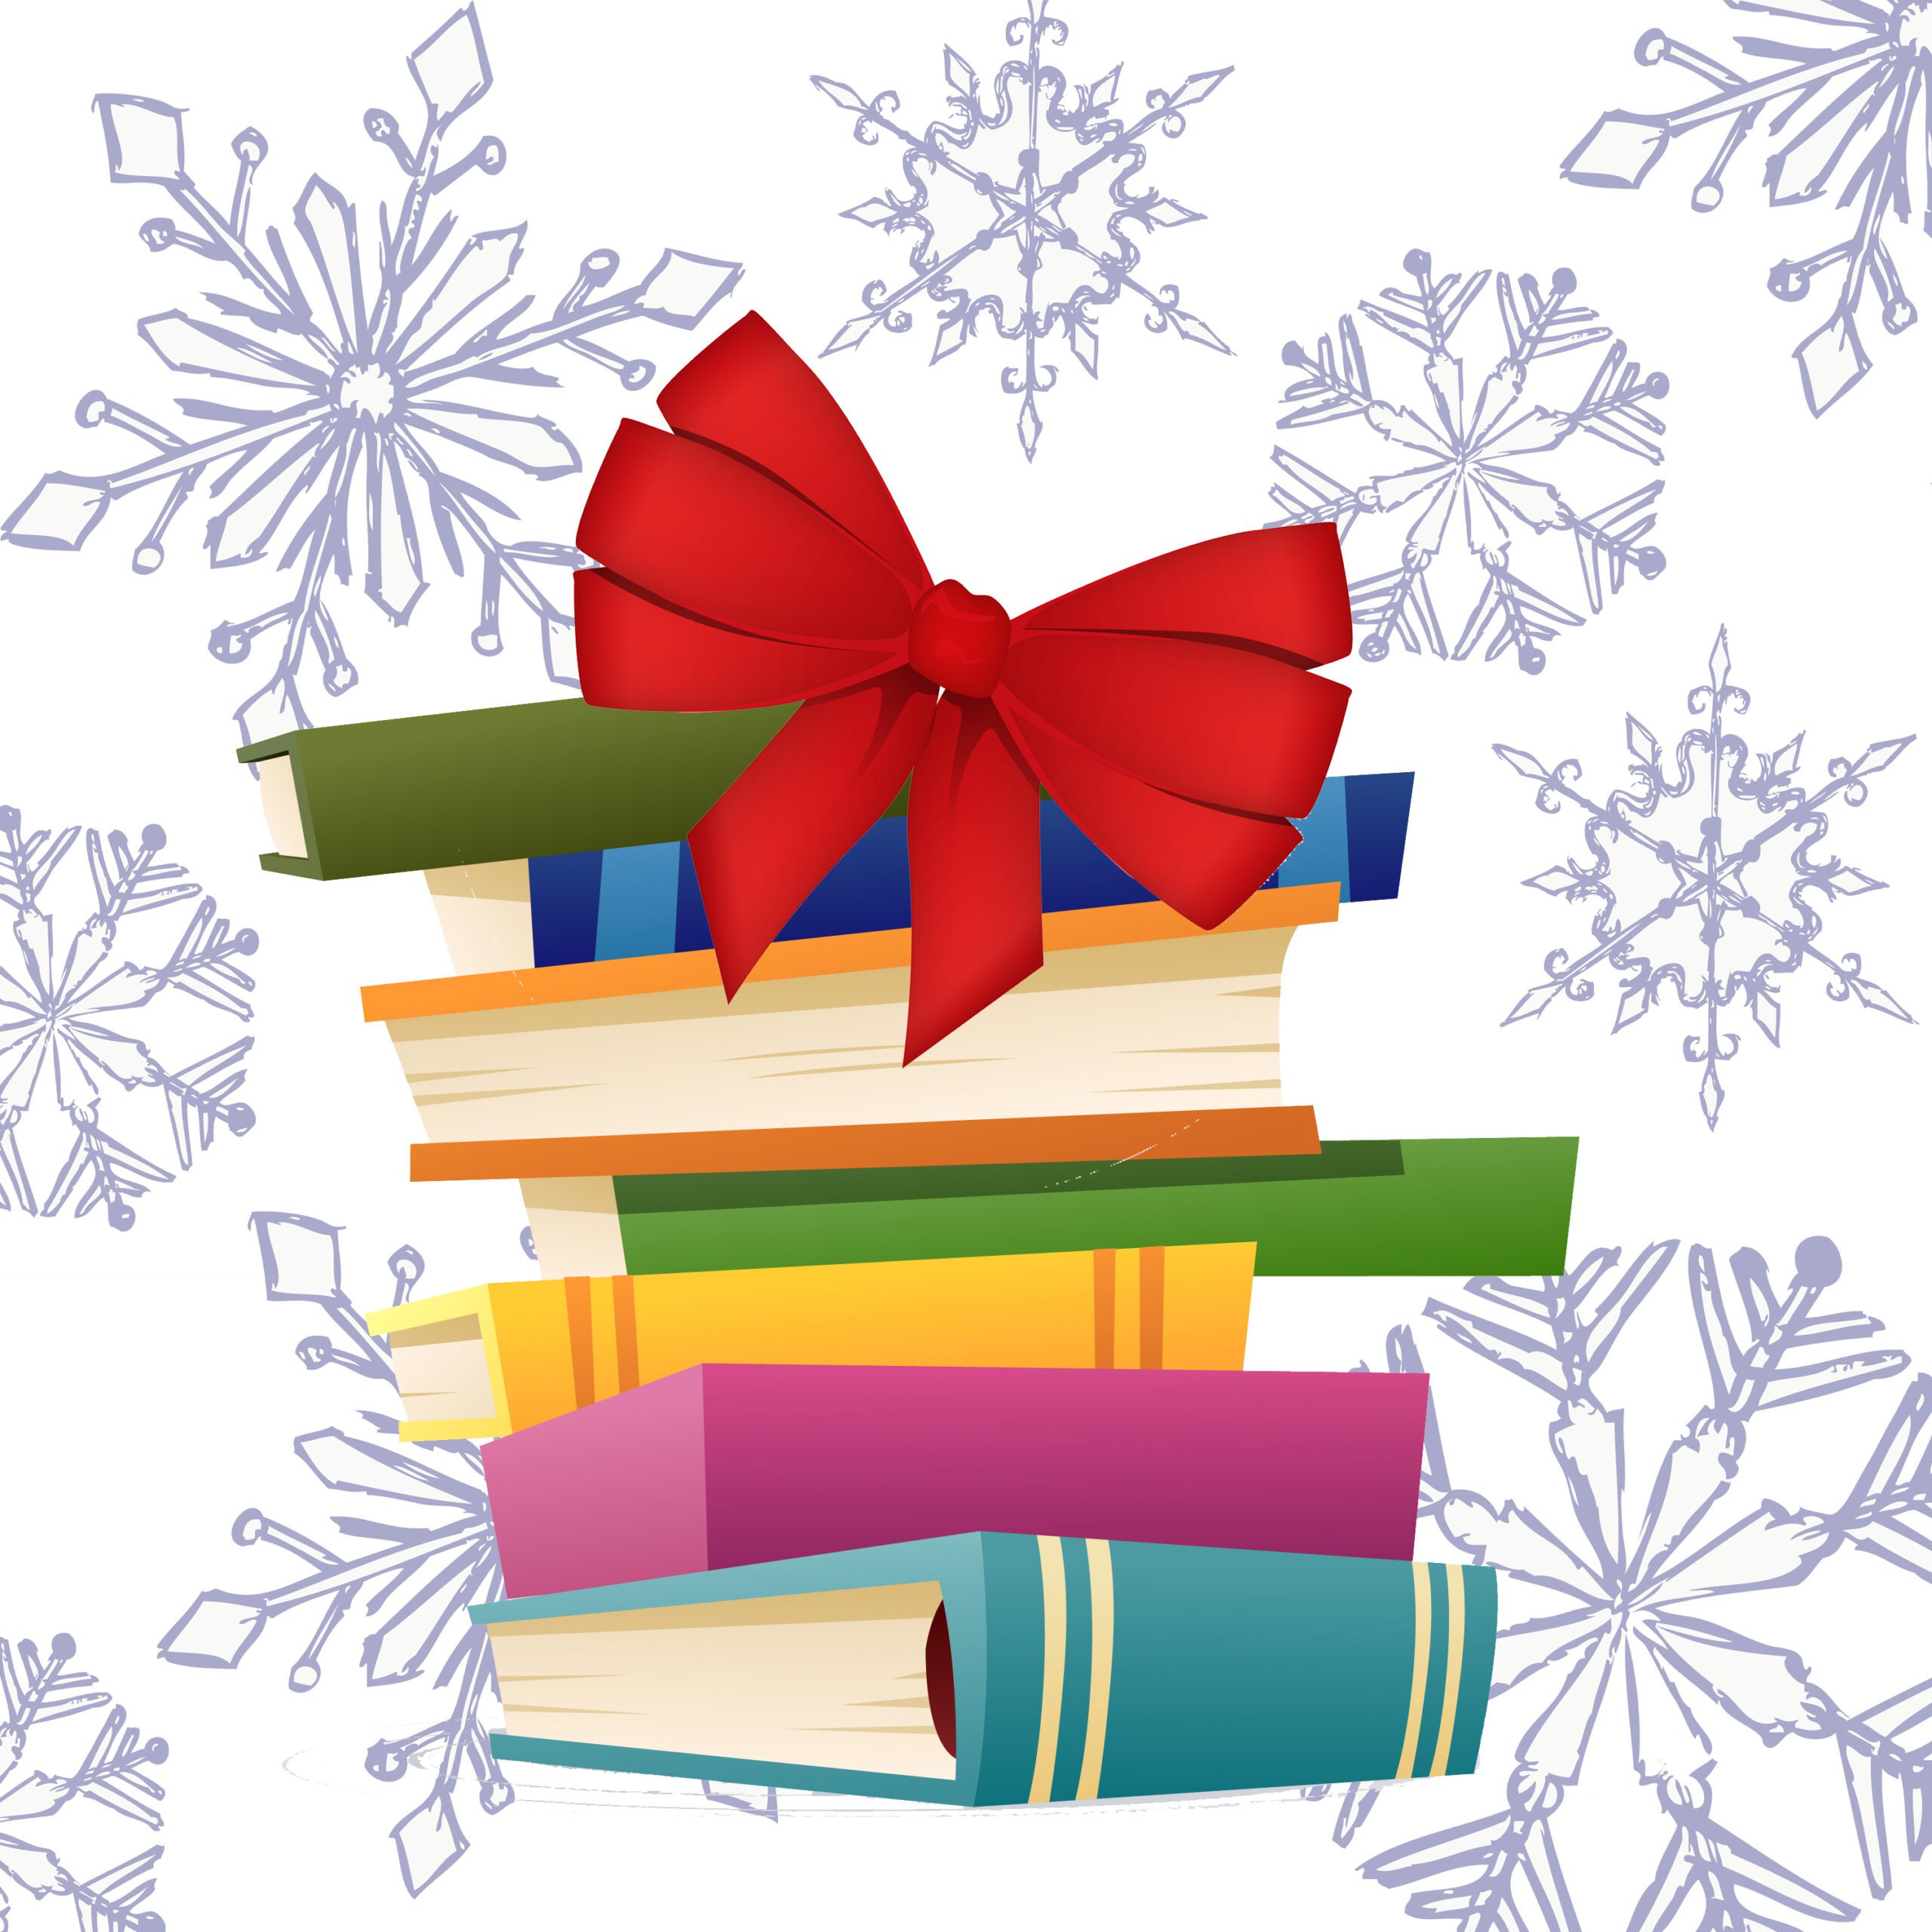 First Book and Chronicle Books are partnering to #GiveBooks to kids in need this holiday season.